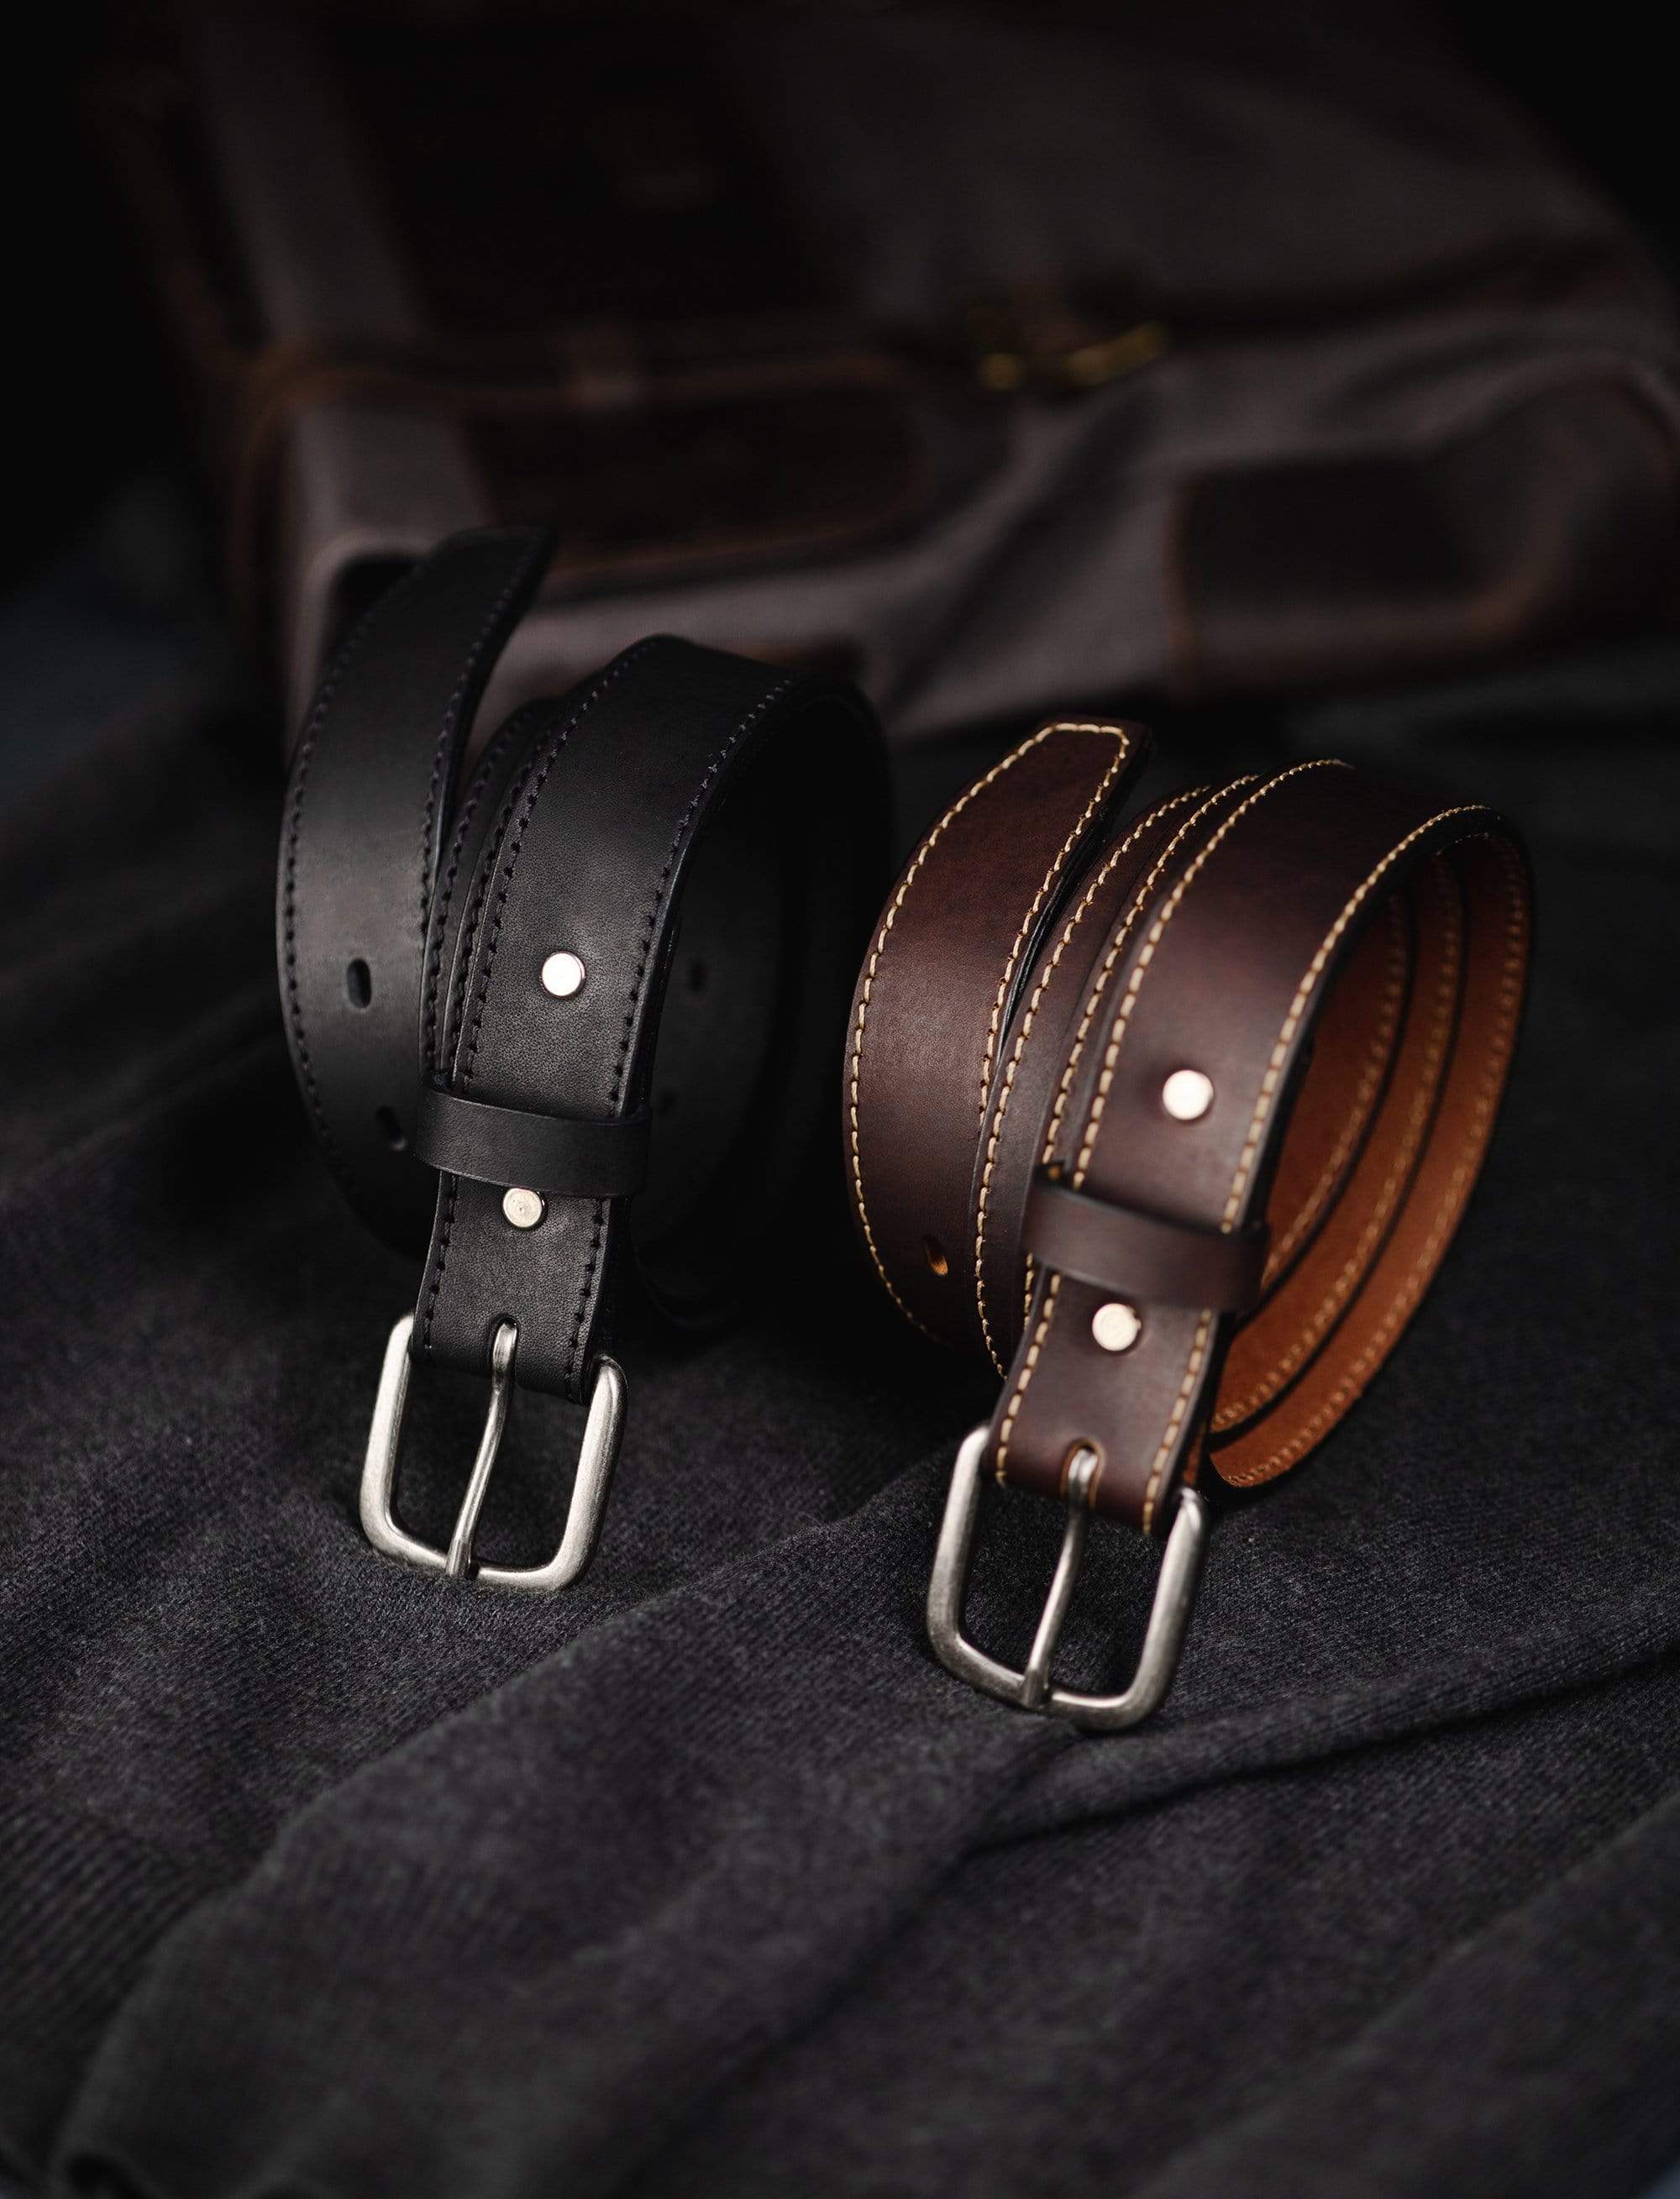 Men's Leather Dress Belts • USA Quality • Duvall Leather